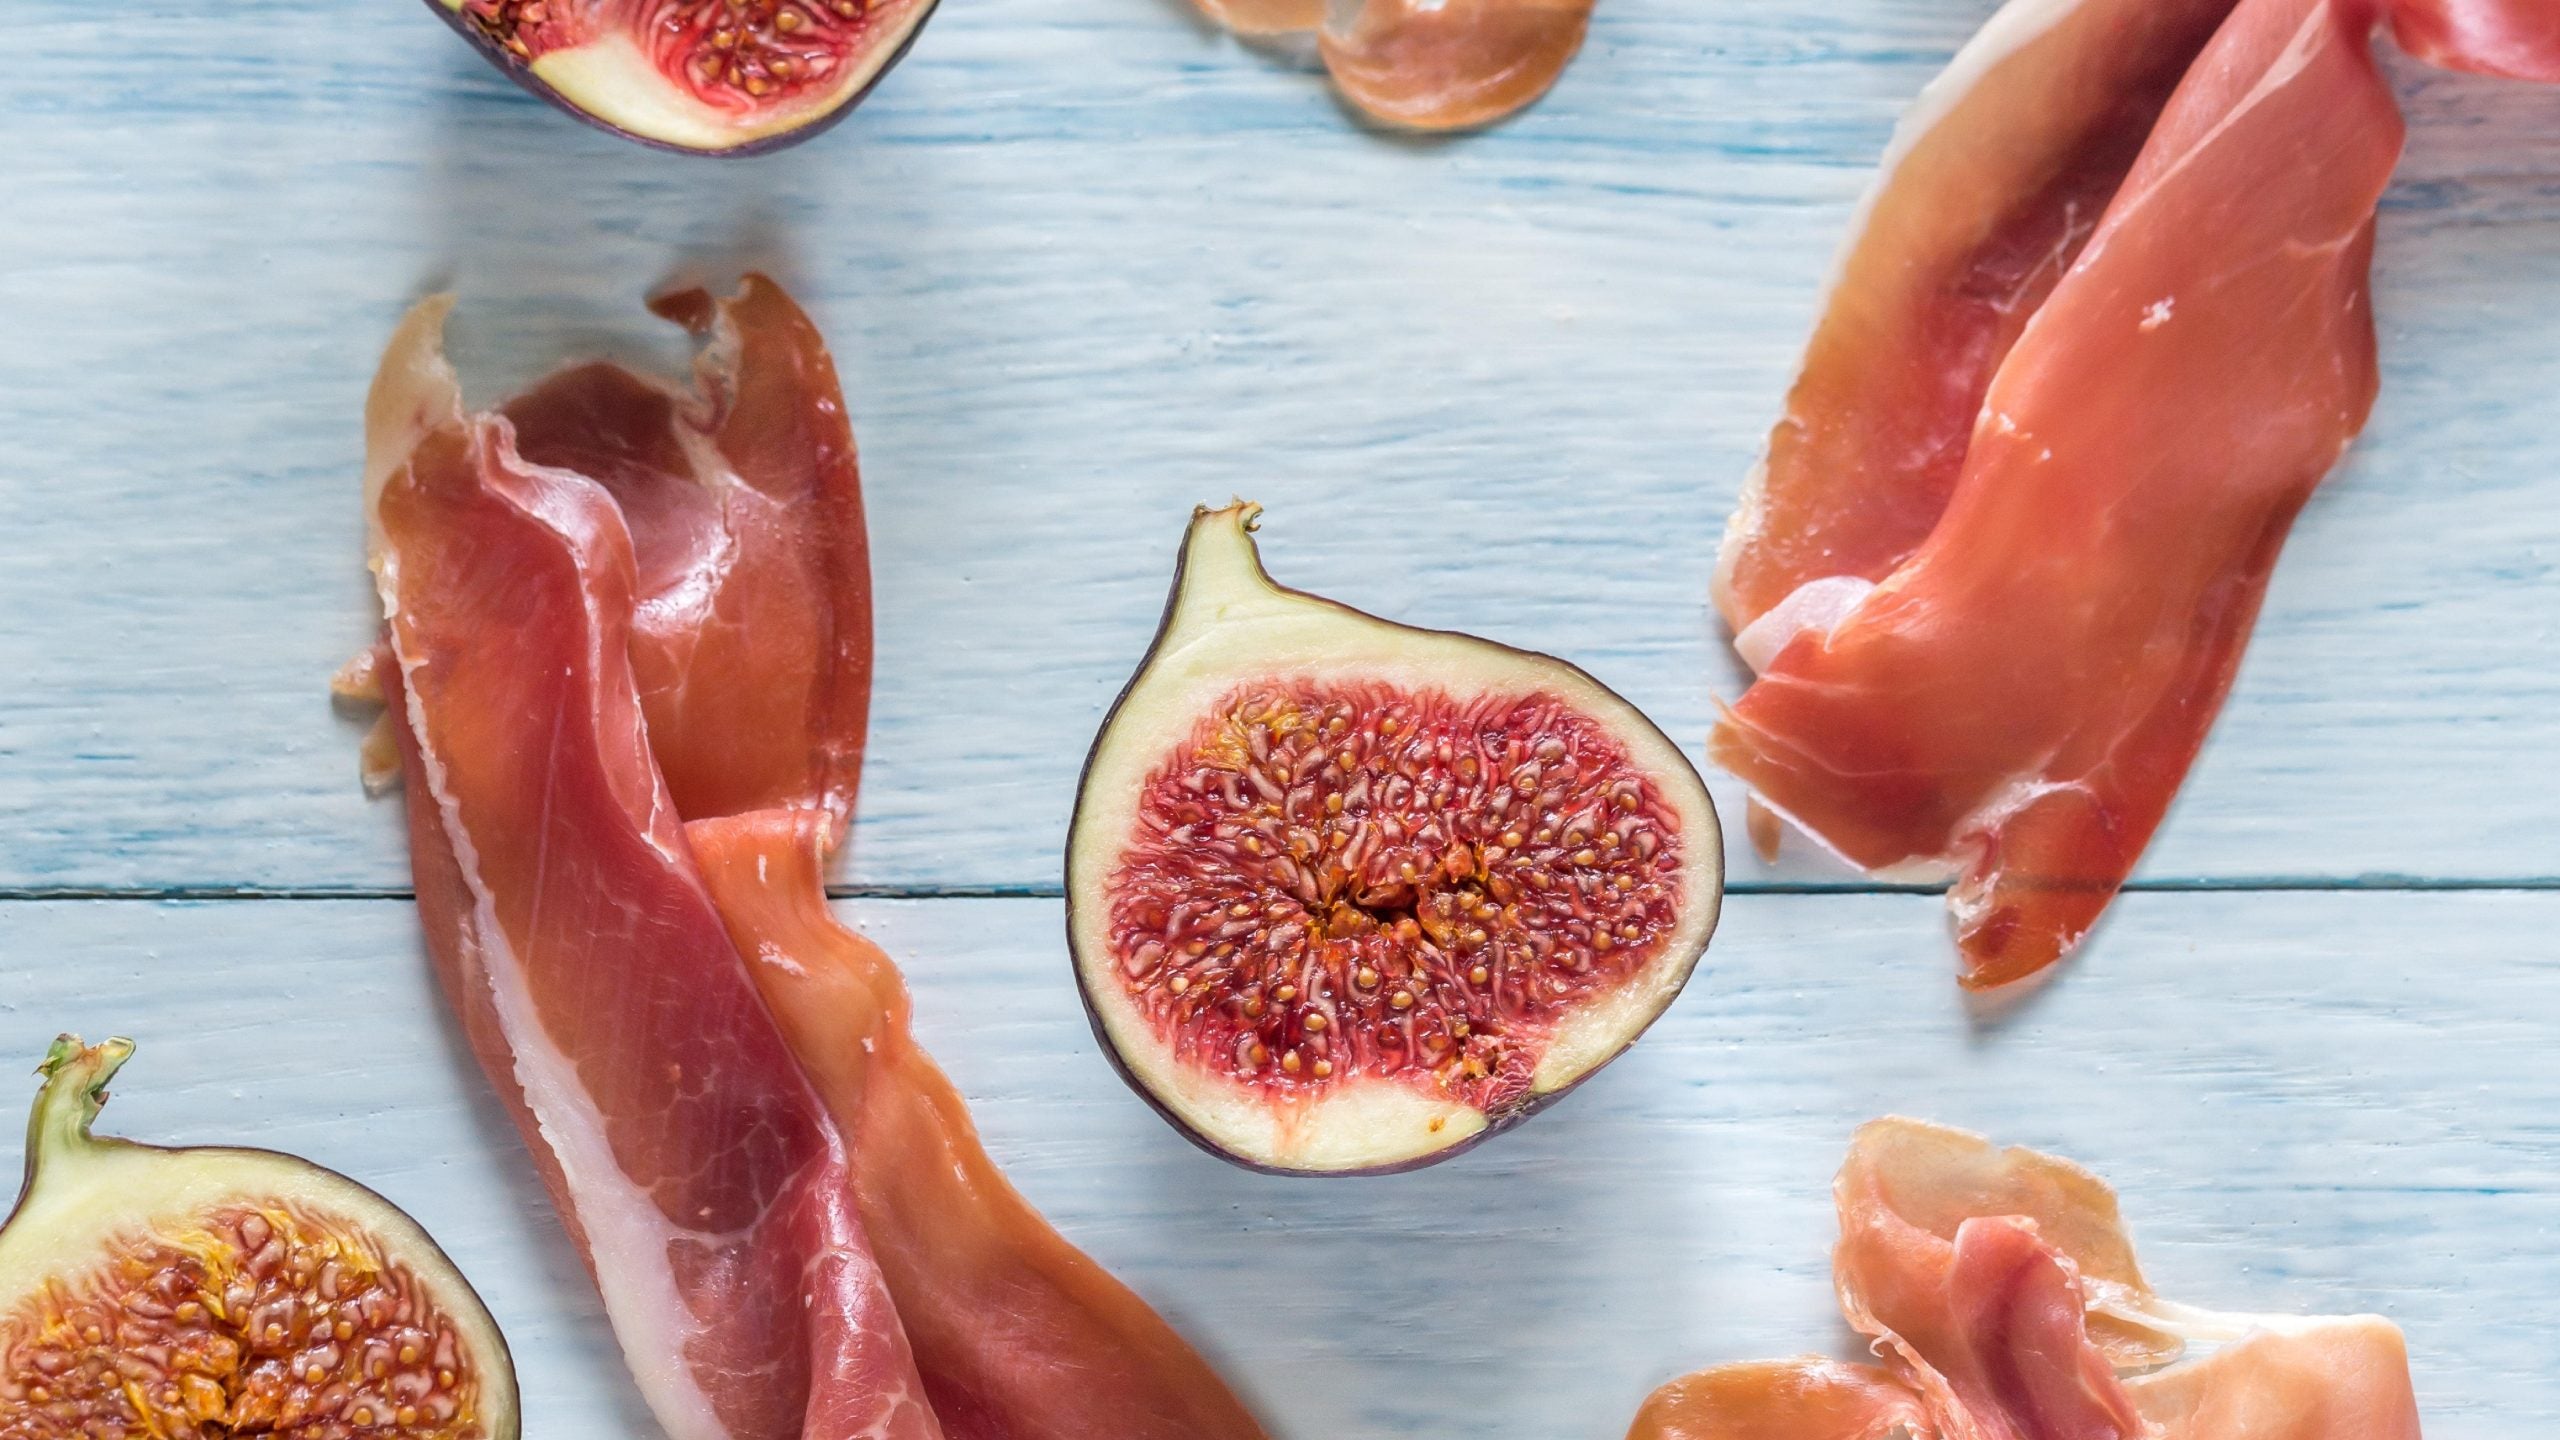 Maple Figs With Duck Bacon, Balsamic Vinegar & Chile - Beck & Bulow